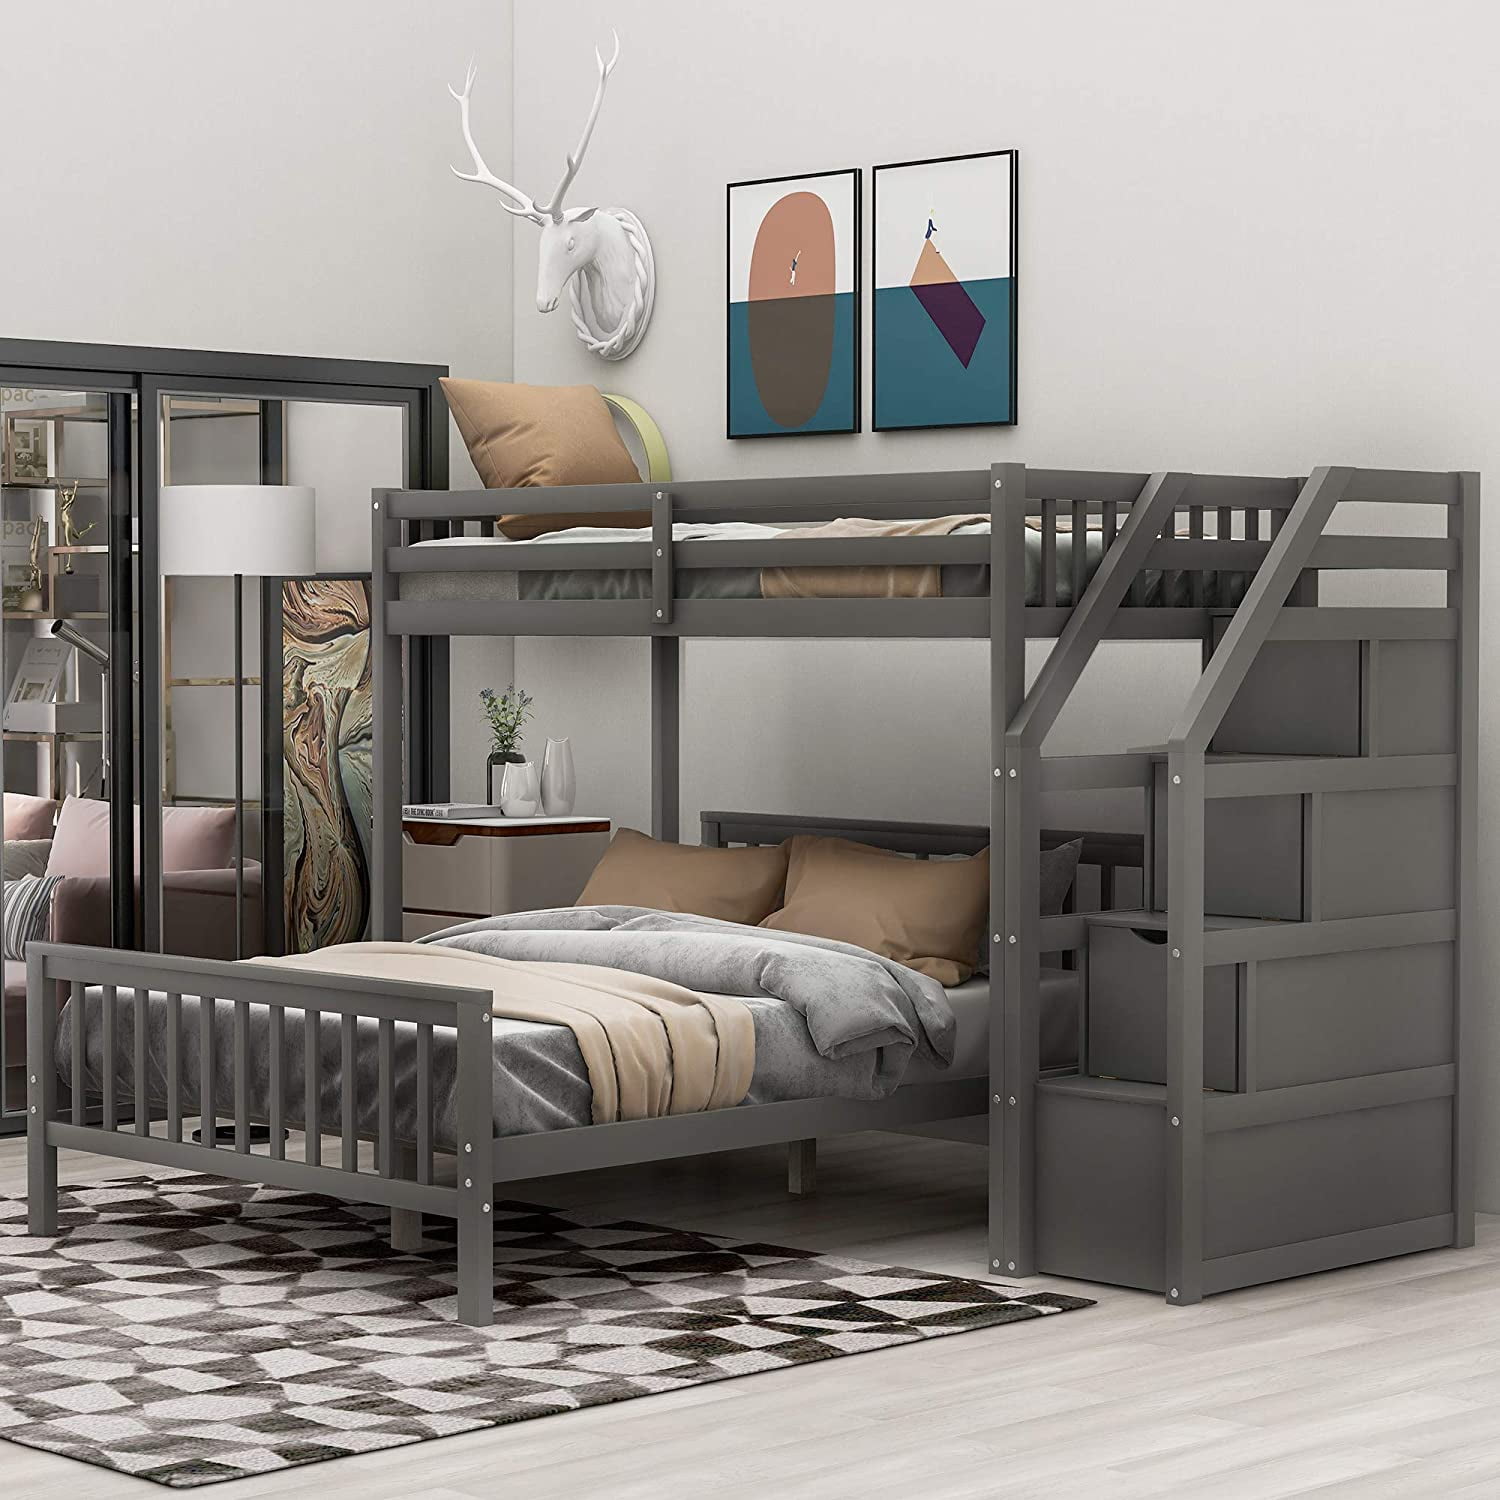 Twin Over Full Loft Beds Bunk, Full Bunk Beds With Storage